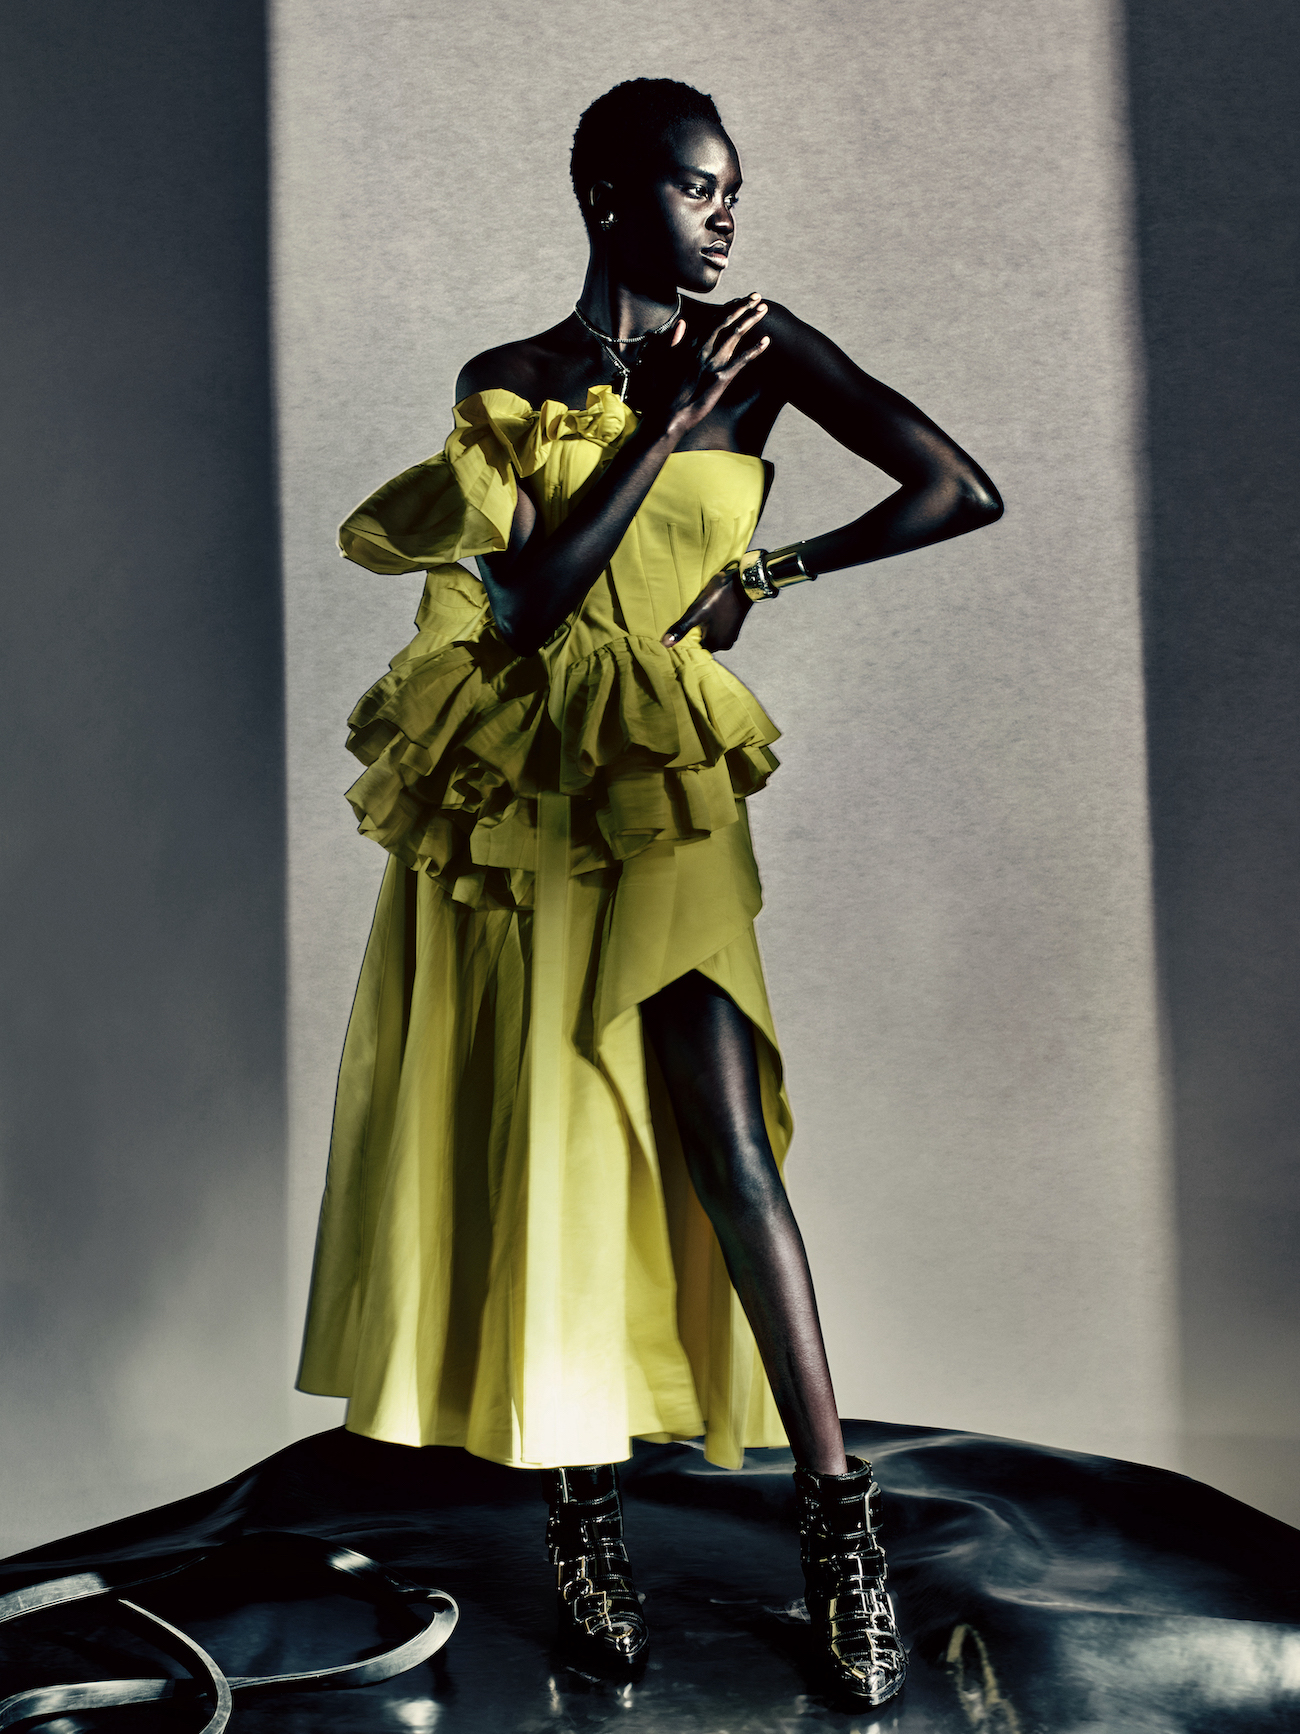  Achenrin wears a bright yellow beetled deconstructed corset dress with an asymmetric skirt, photographed by Paolo Roversi.